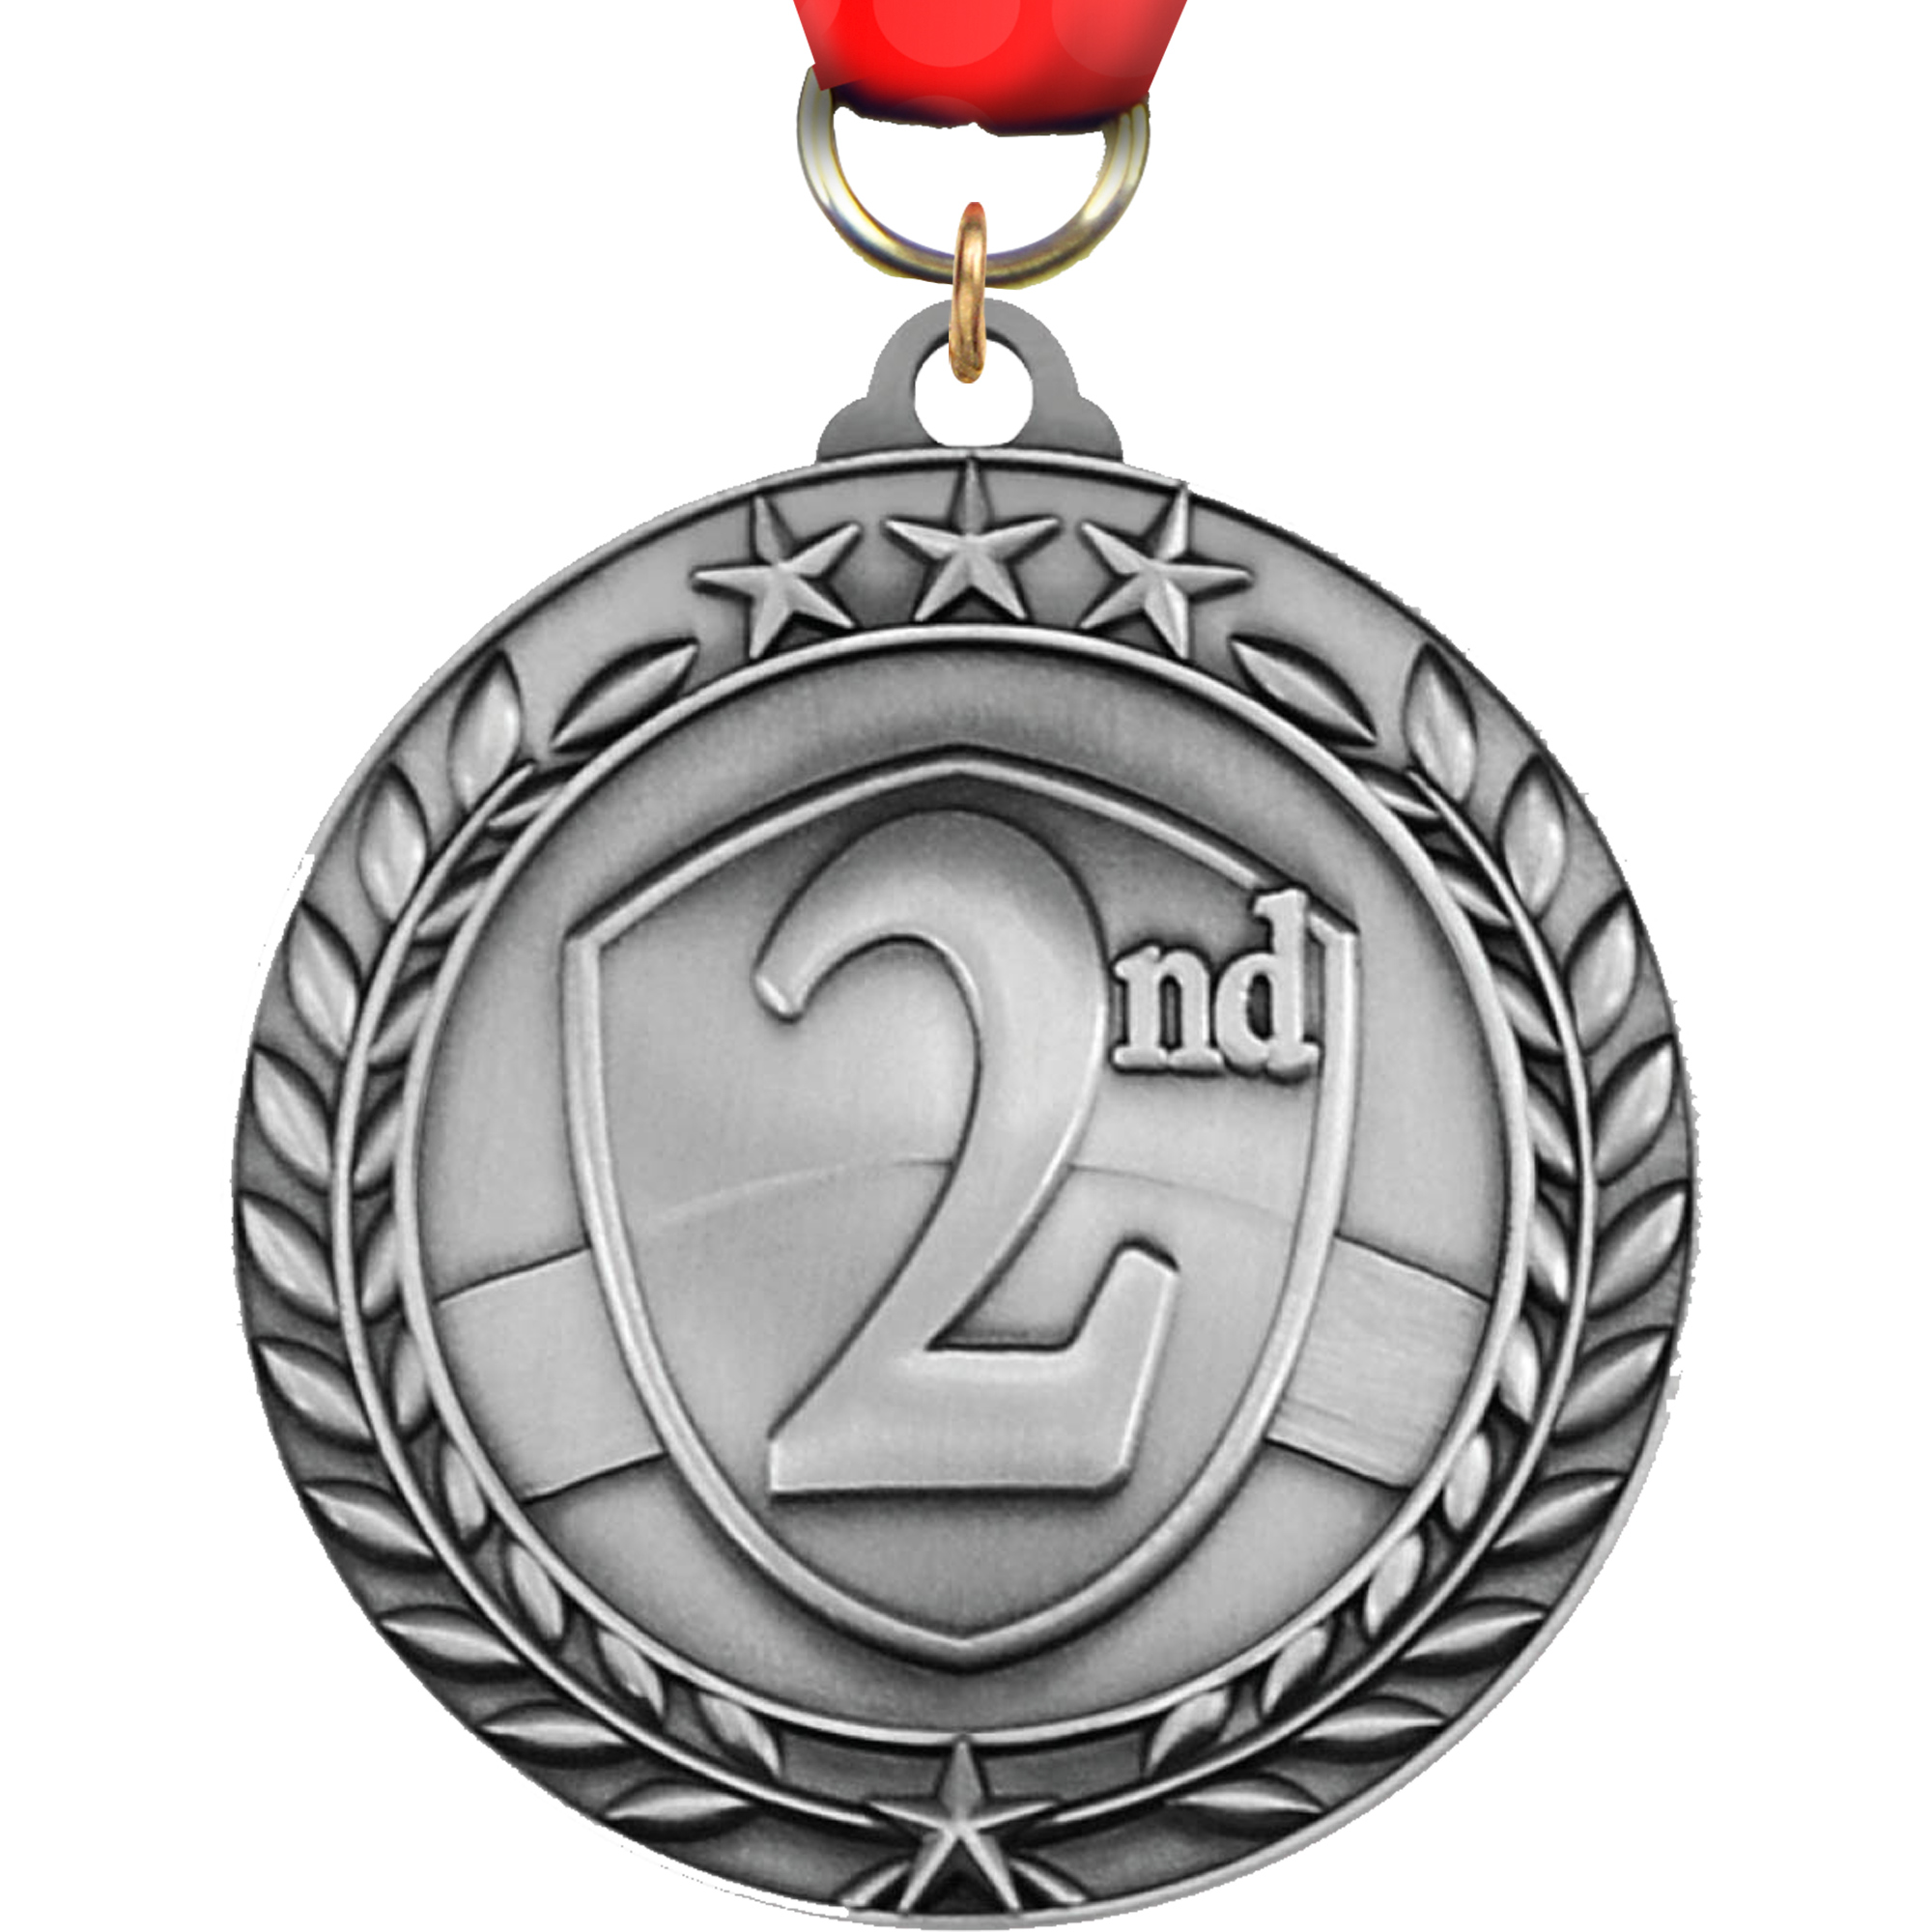 Second Place Dimensional Medal - Silver